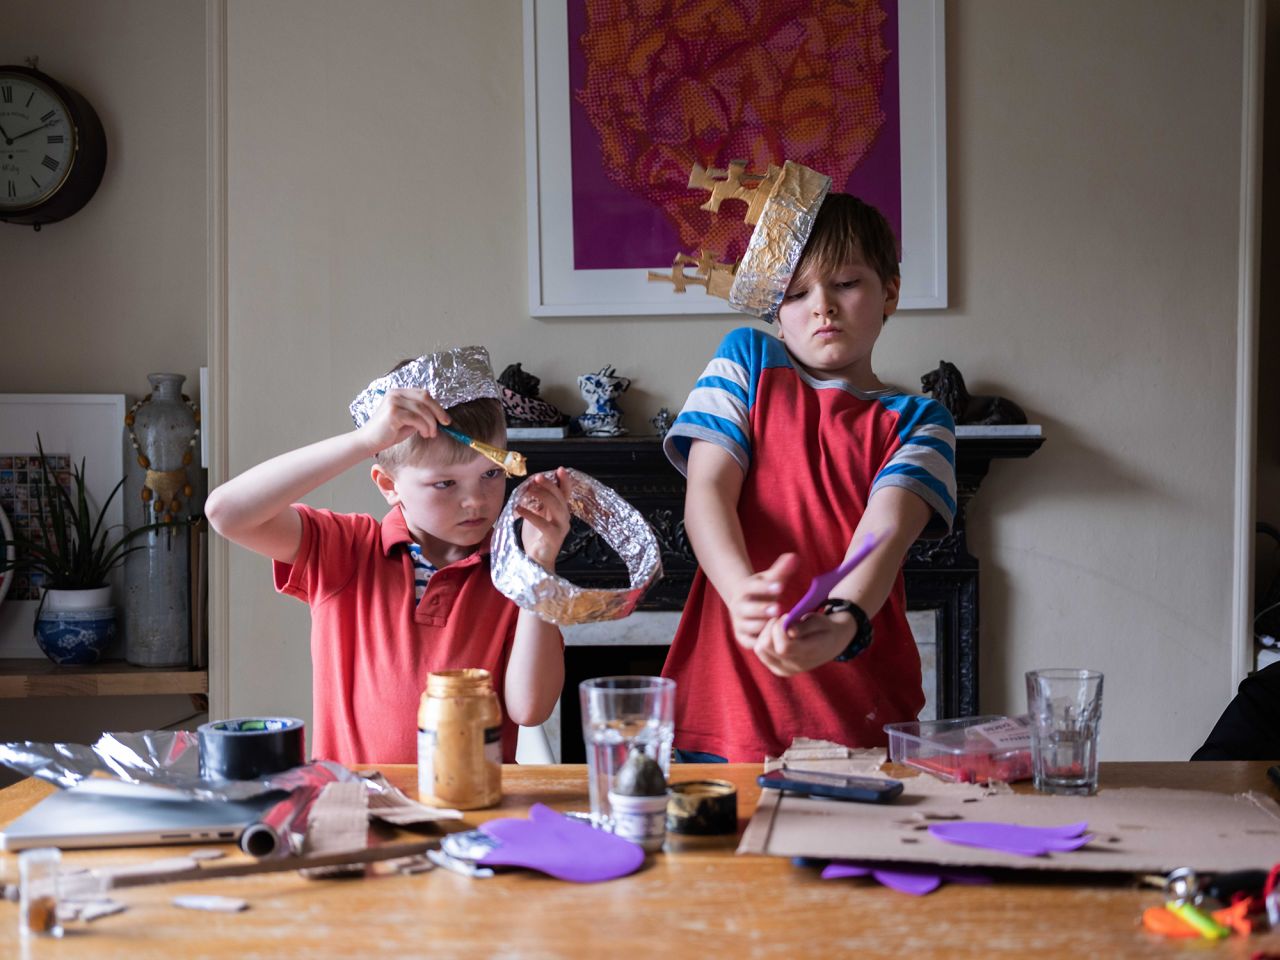 Brothers Frankie, 7, and Dylan, 9, make crowns at their home in London ahead of the coronation street parties on Sunday, May 7.